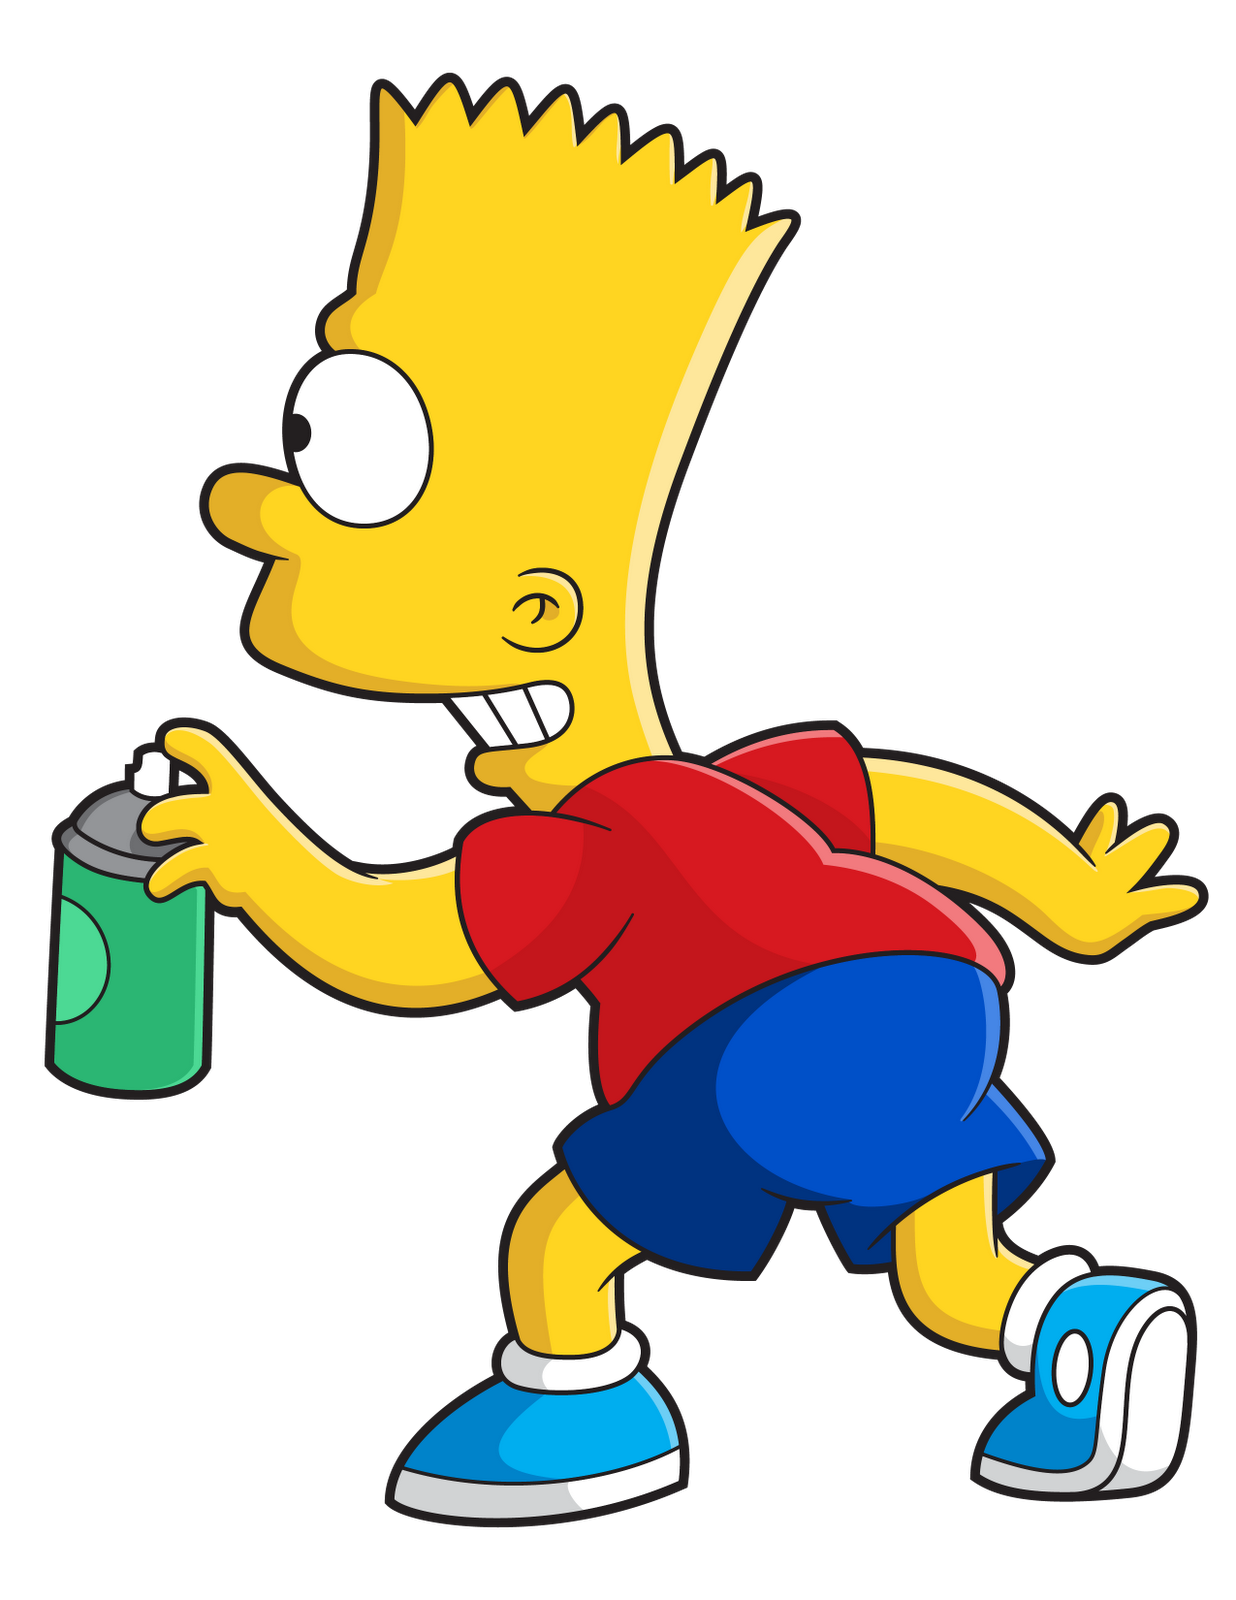 Bart Simpson PNG, Bart HD PNG - Free PNG